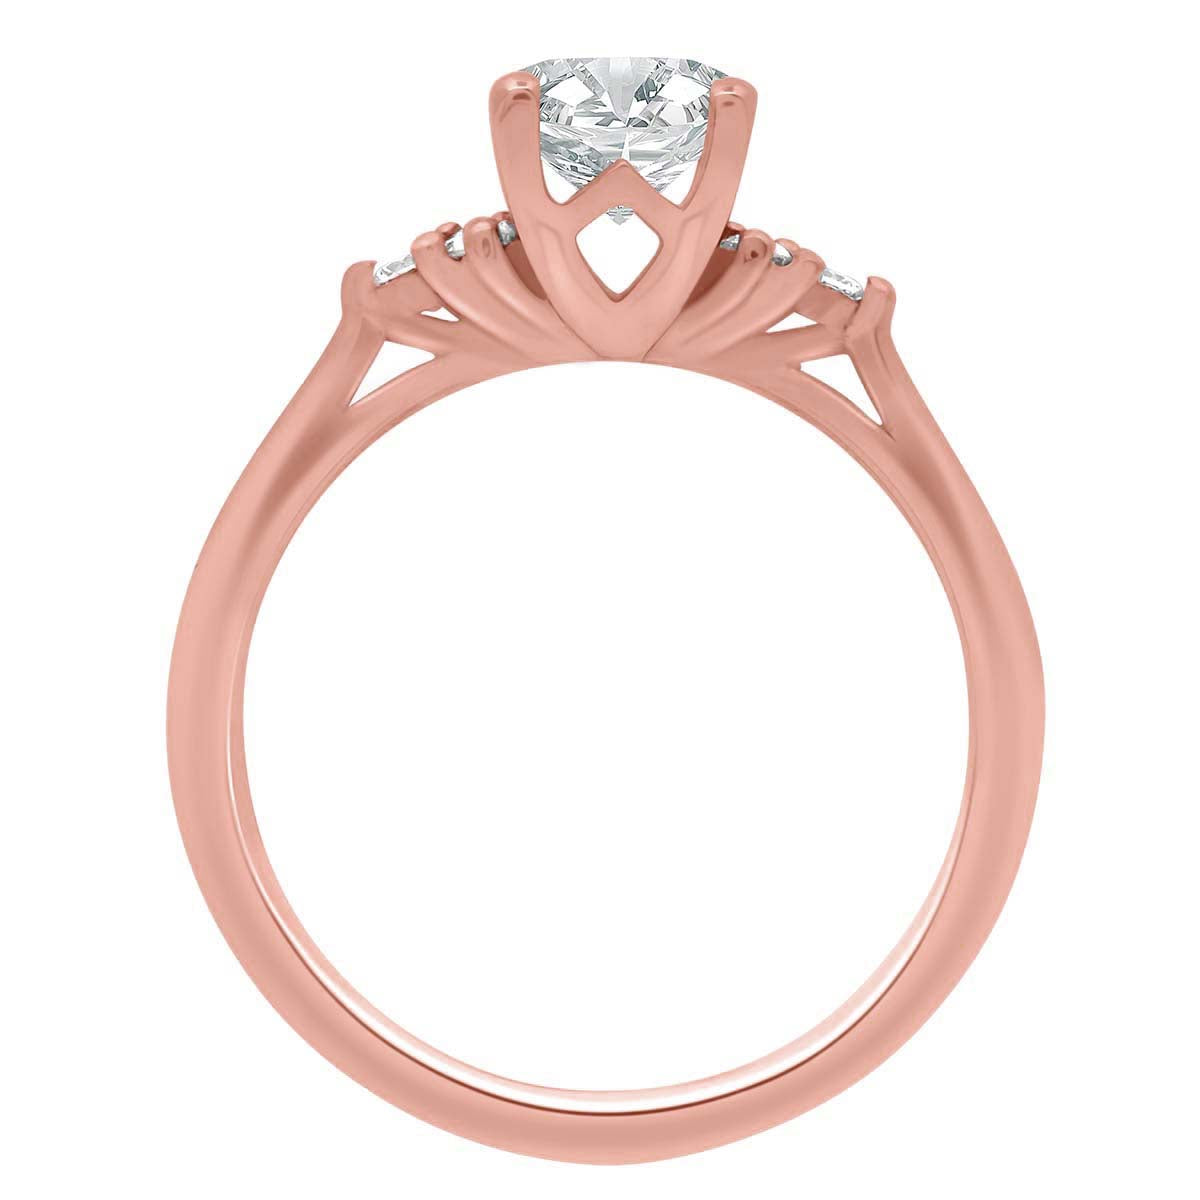 Handmade Engagement Ring in rose gold standing upright